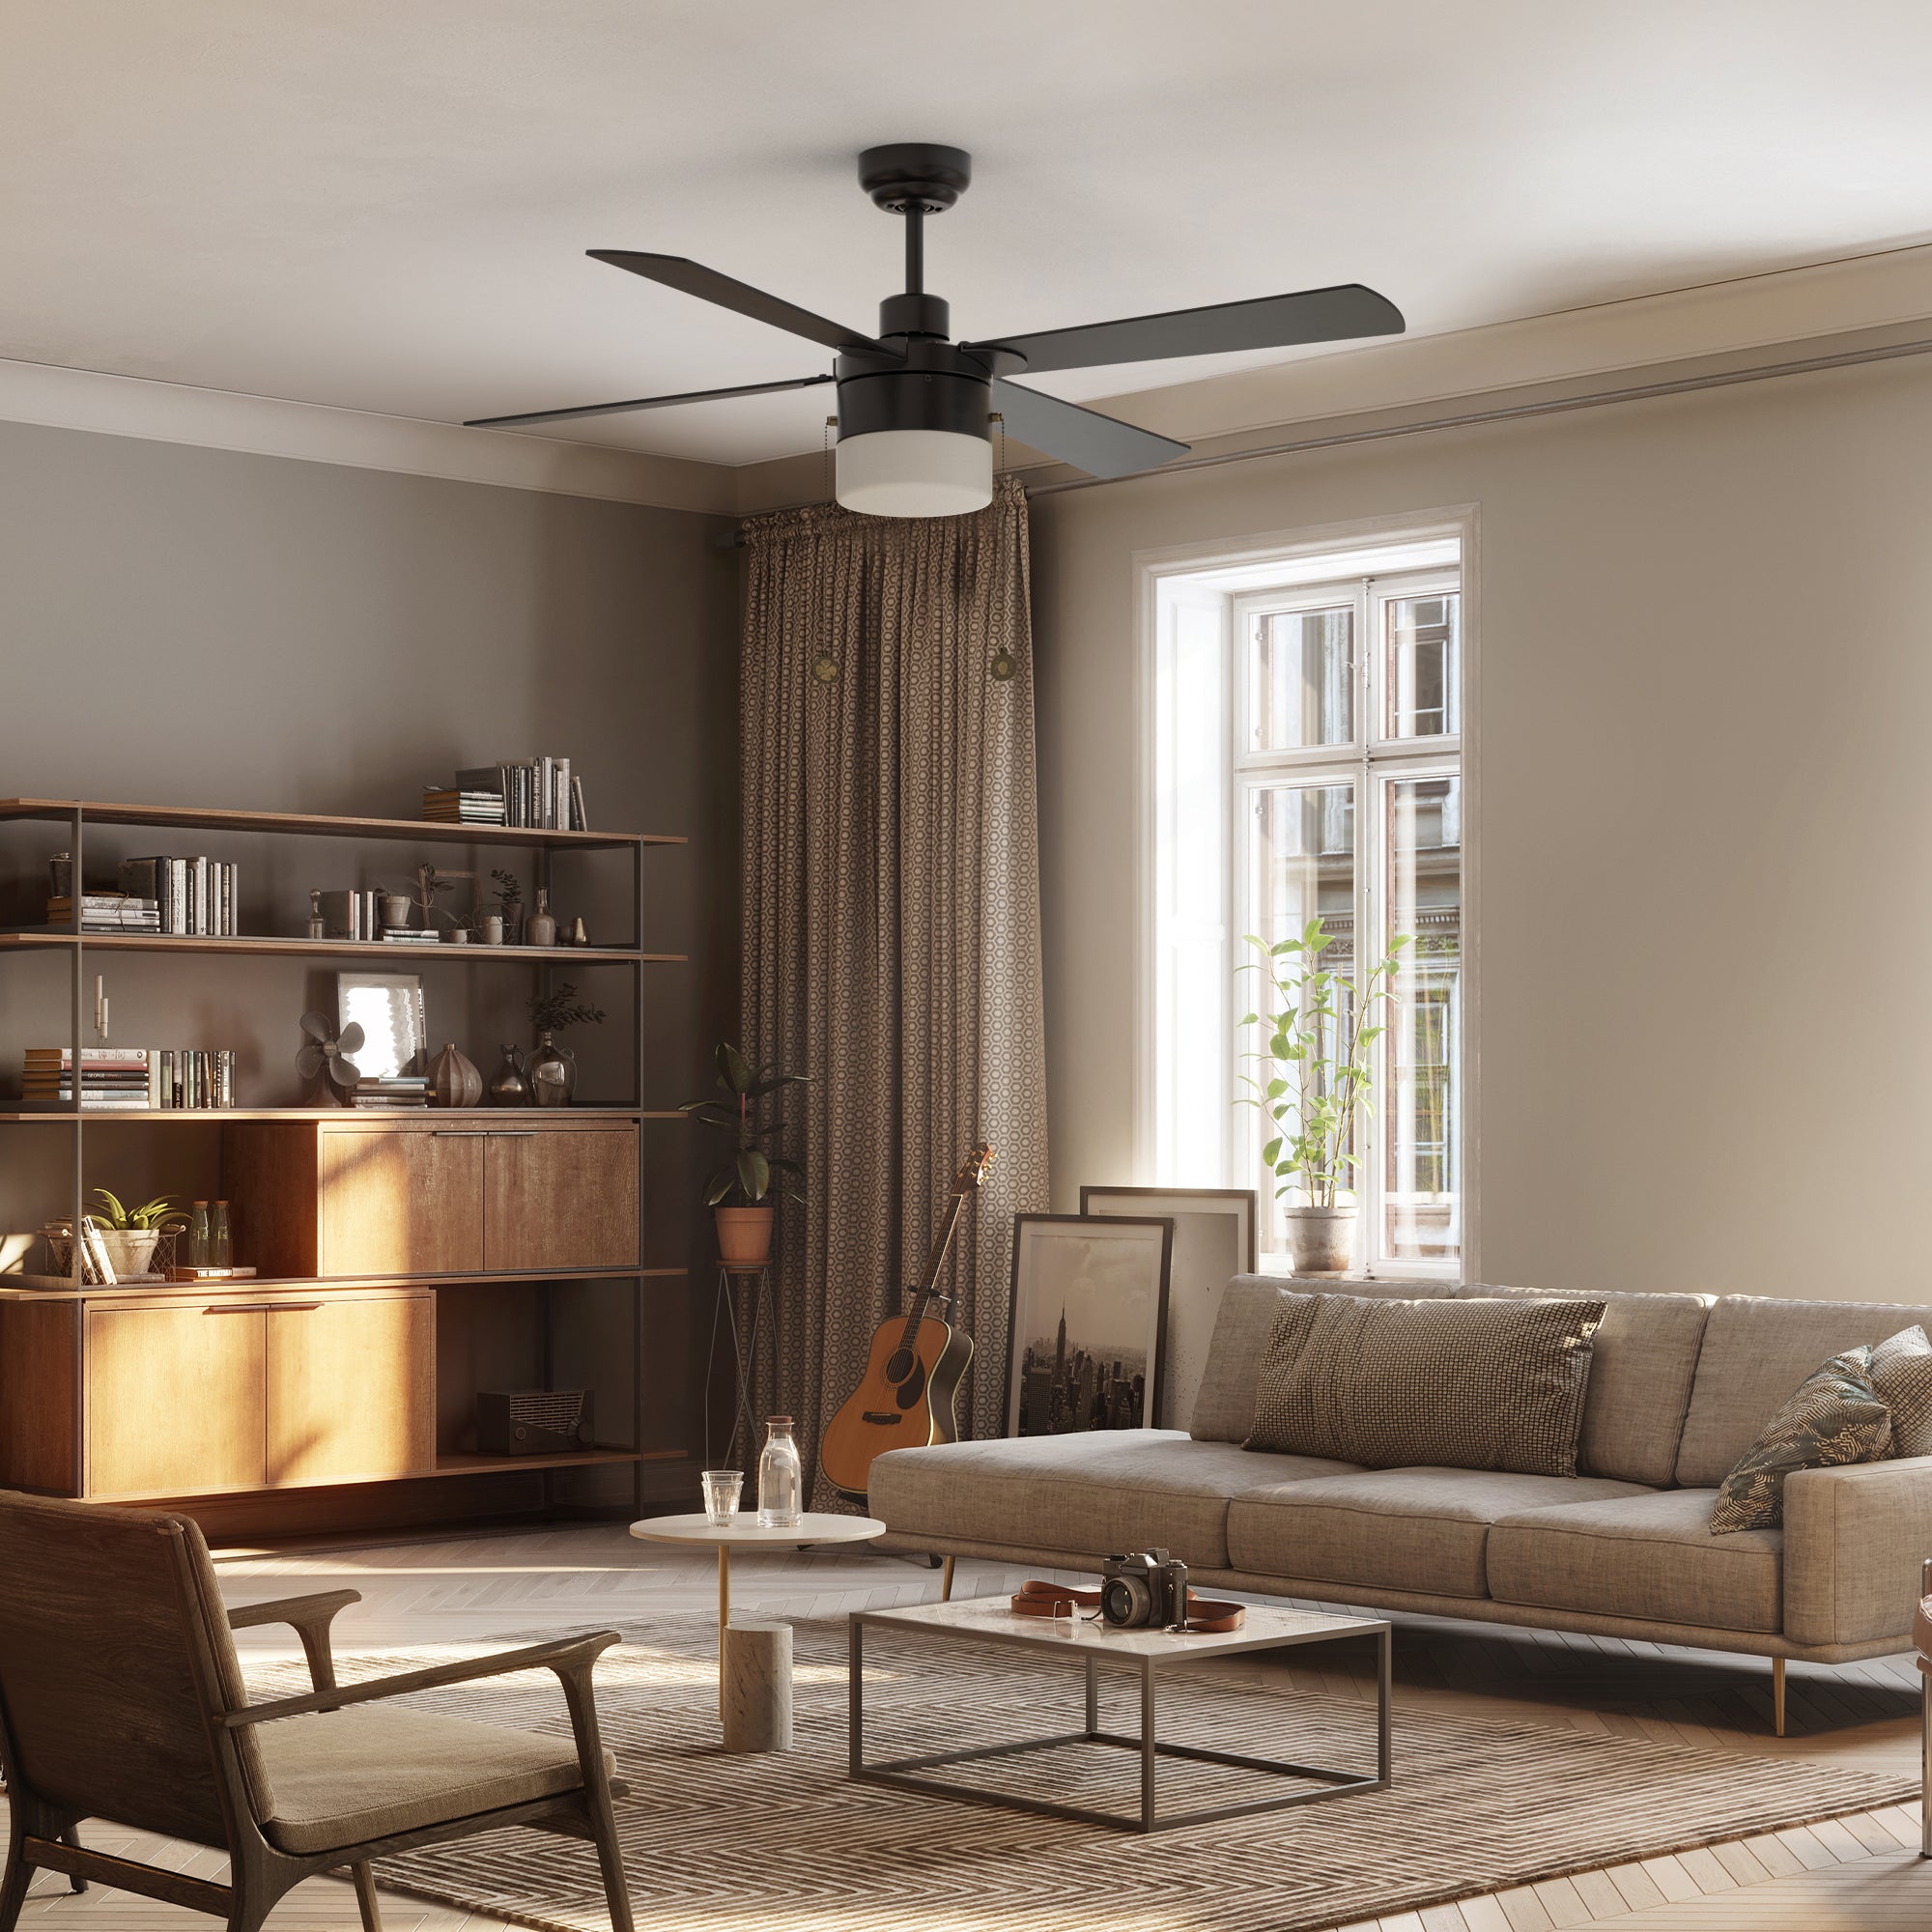 52inch black pull chain ceiling fan with four plywood blades. Featuring with 3-speed ac motor, provide max 4716 CFM airflow, which keep your modern living room cooling. 